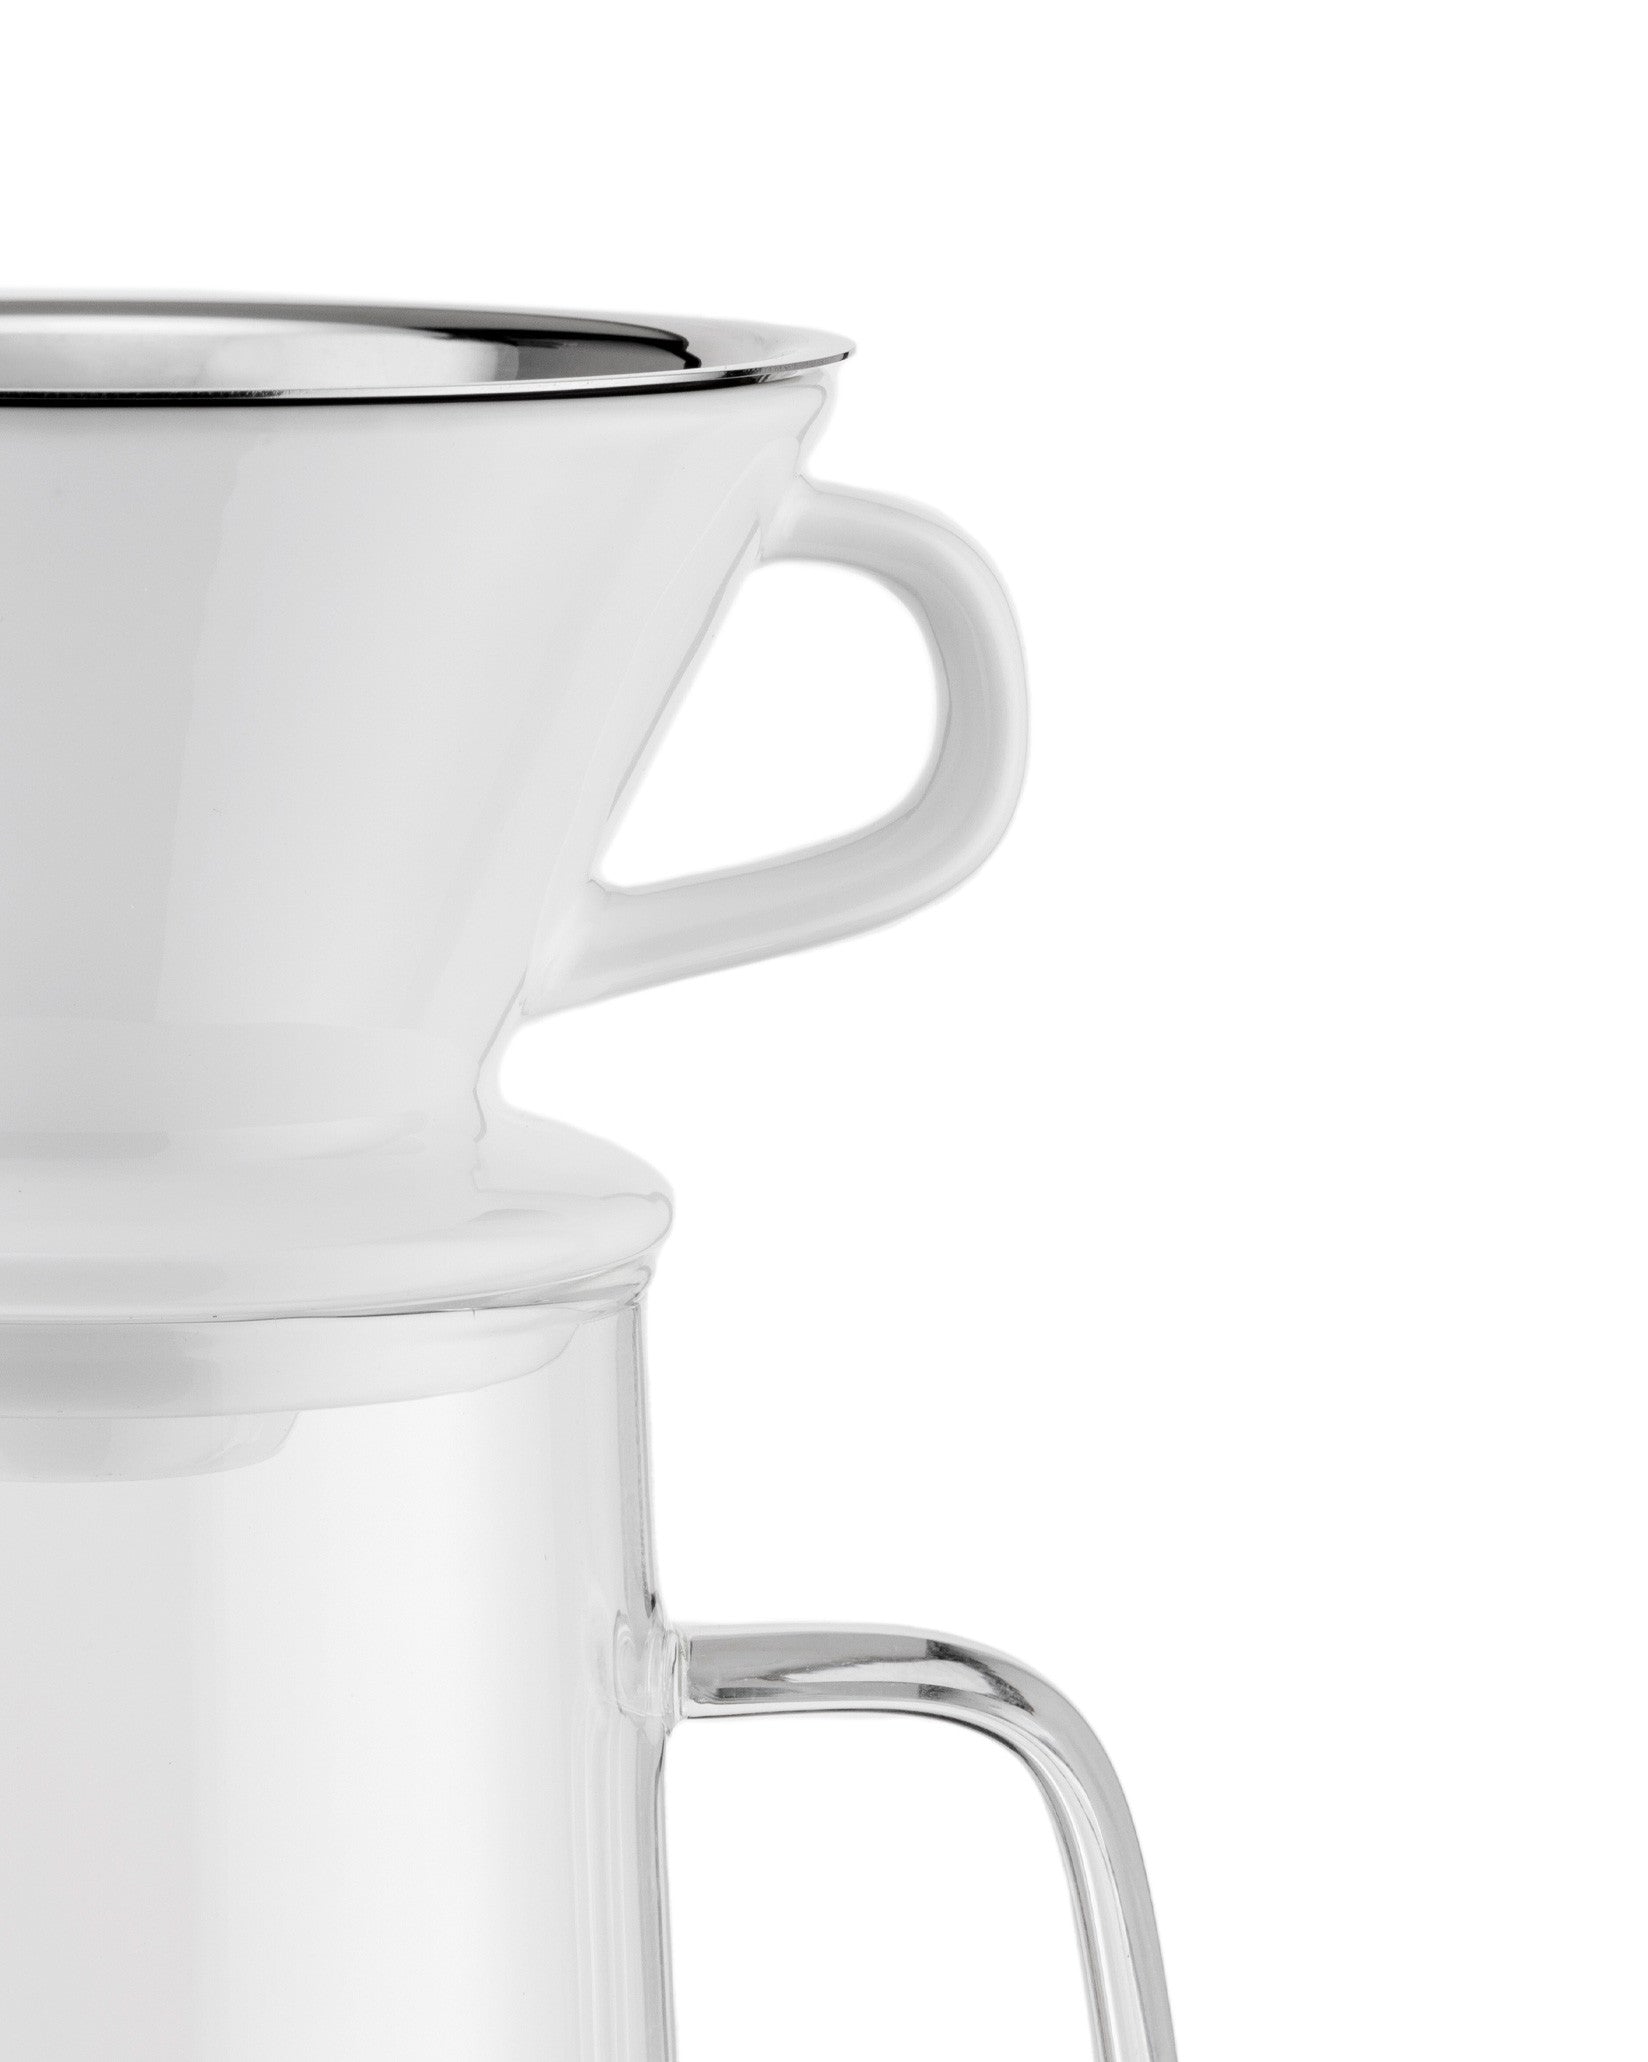 Porcelain 6 Cup Pour Over Coffee Maker